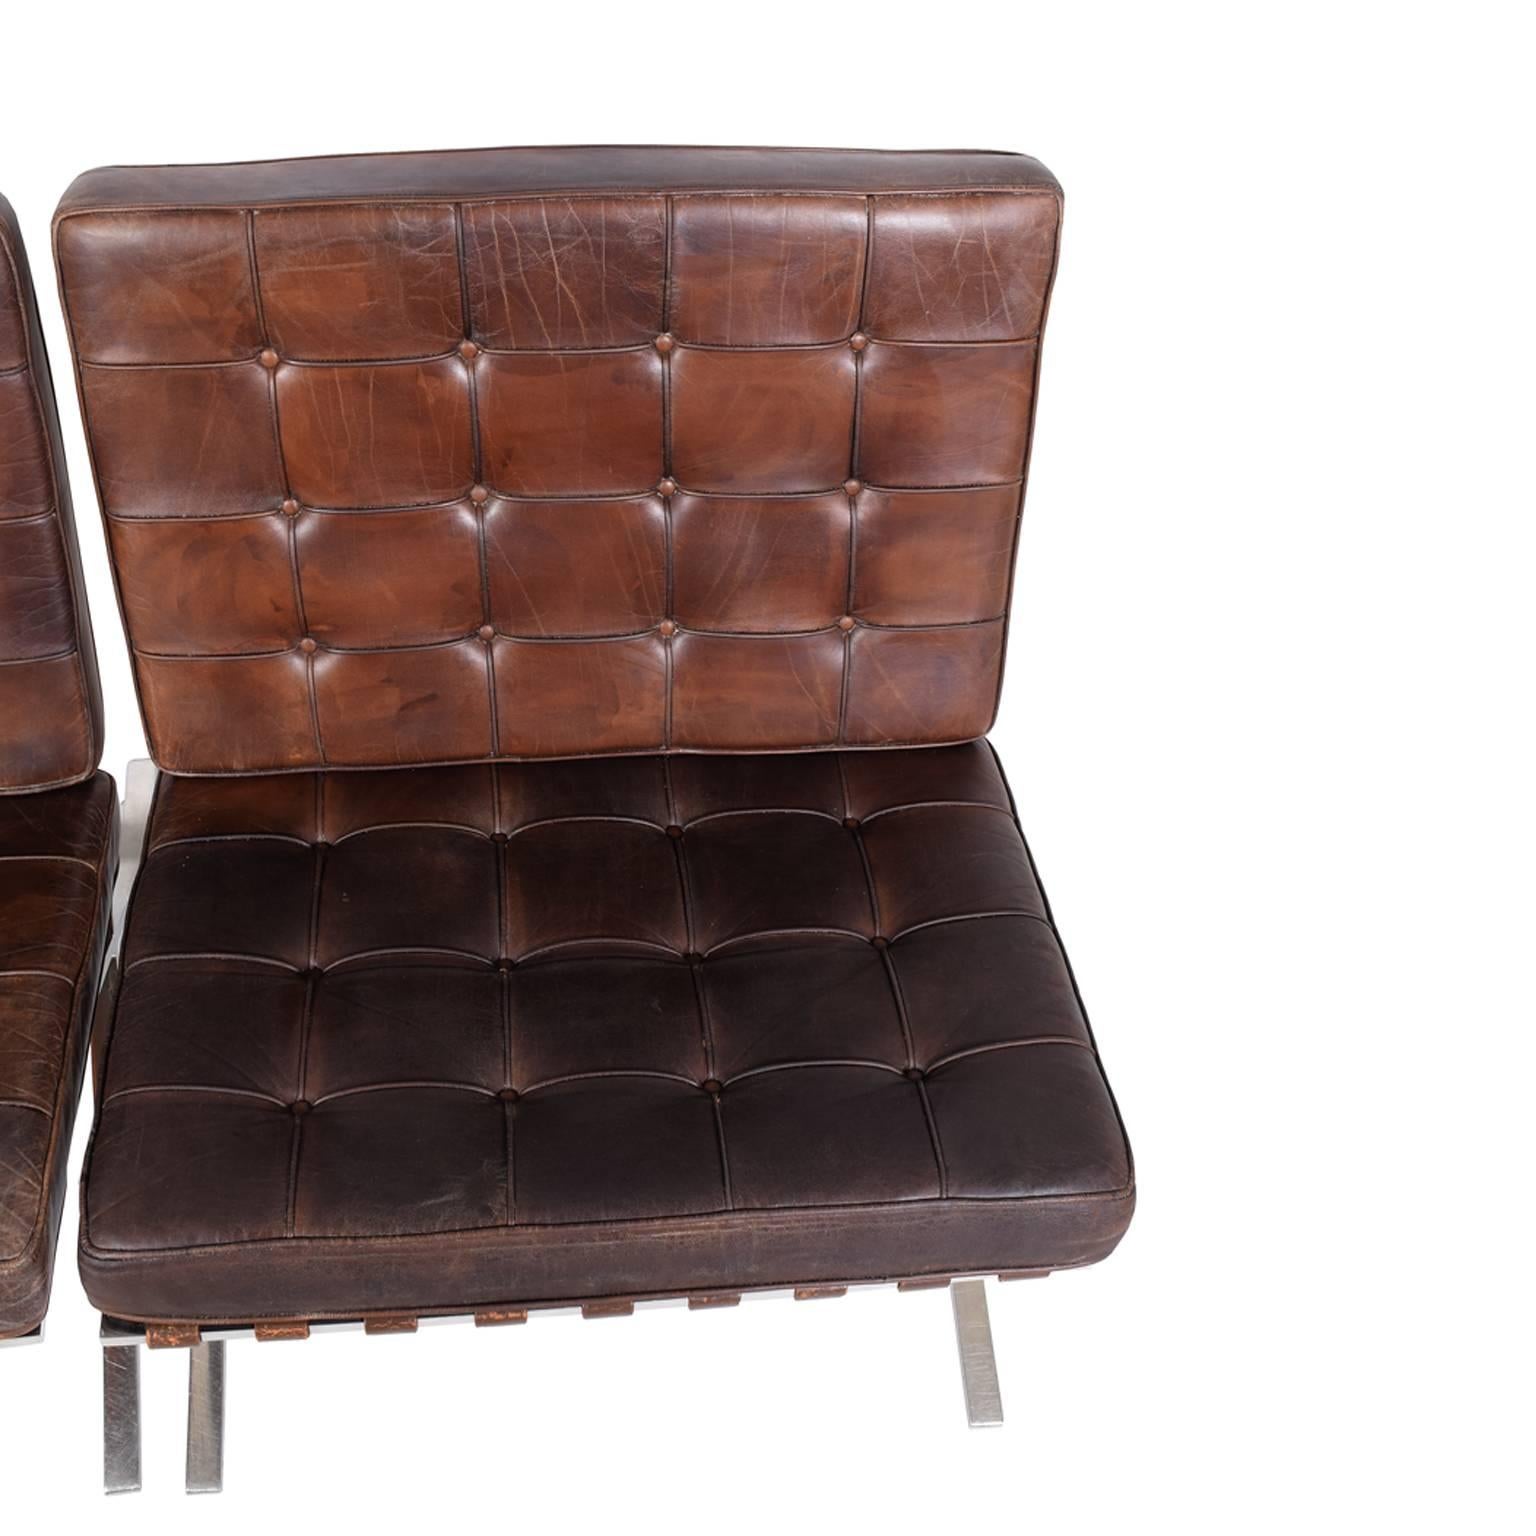 Mid-20th Century Pair of 1975 Barcelona Chairs by Mies van der Rohde for Knoll